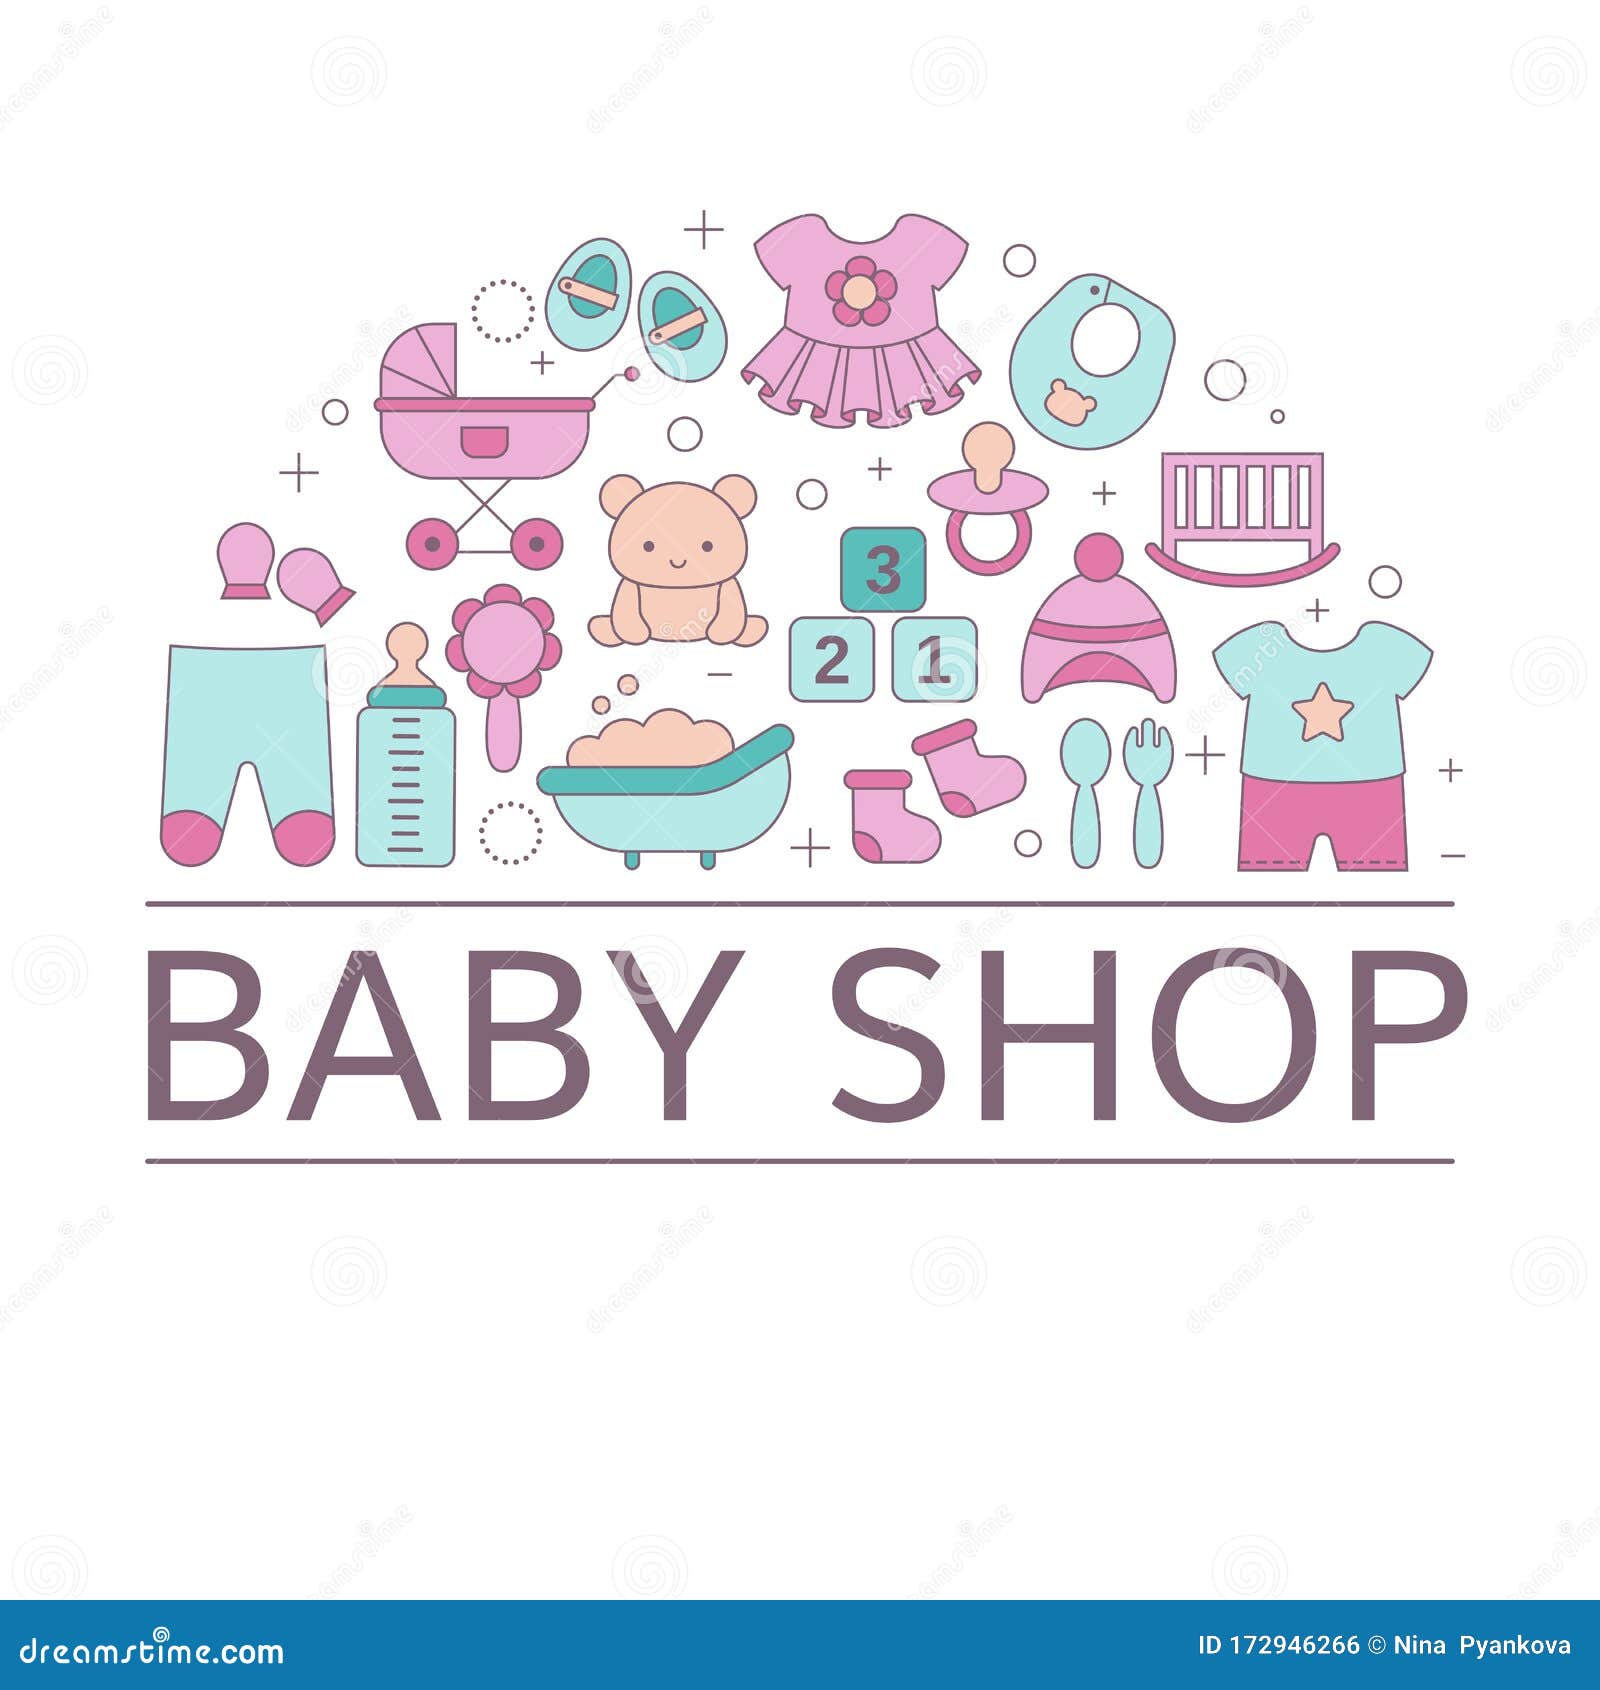 Concept of Baby Shop with Baby Item Icons Stock Vector - Illustration ...